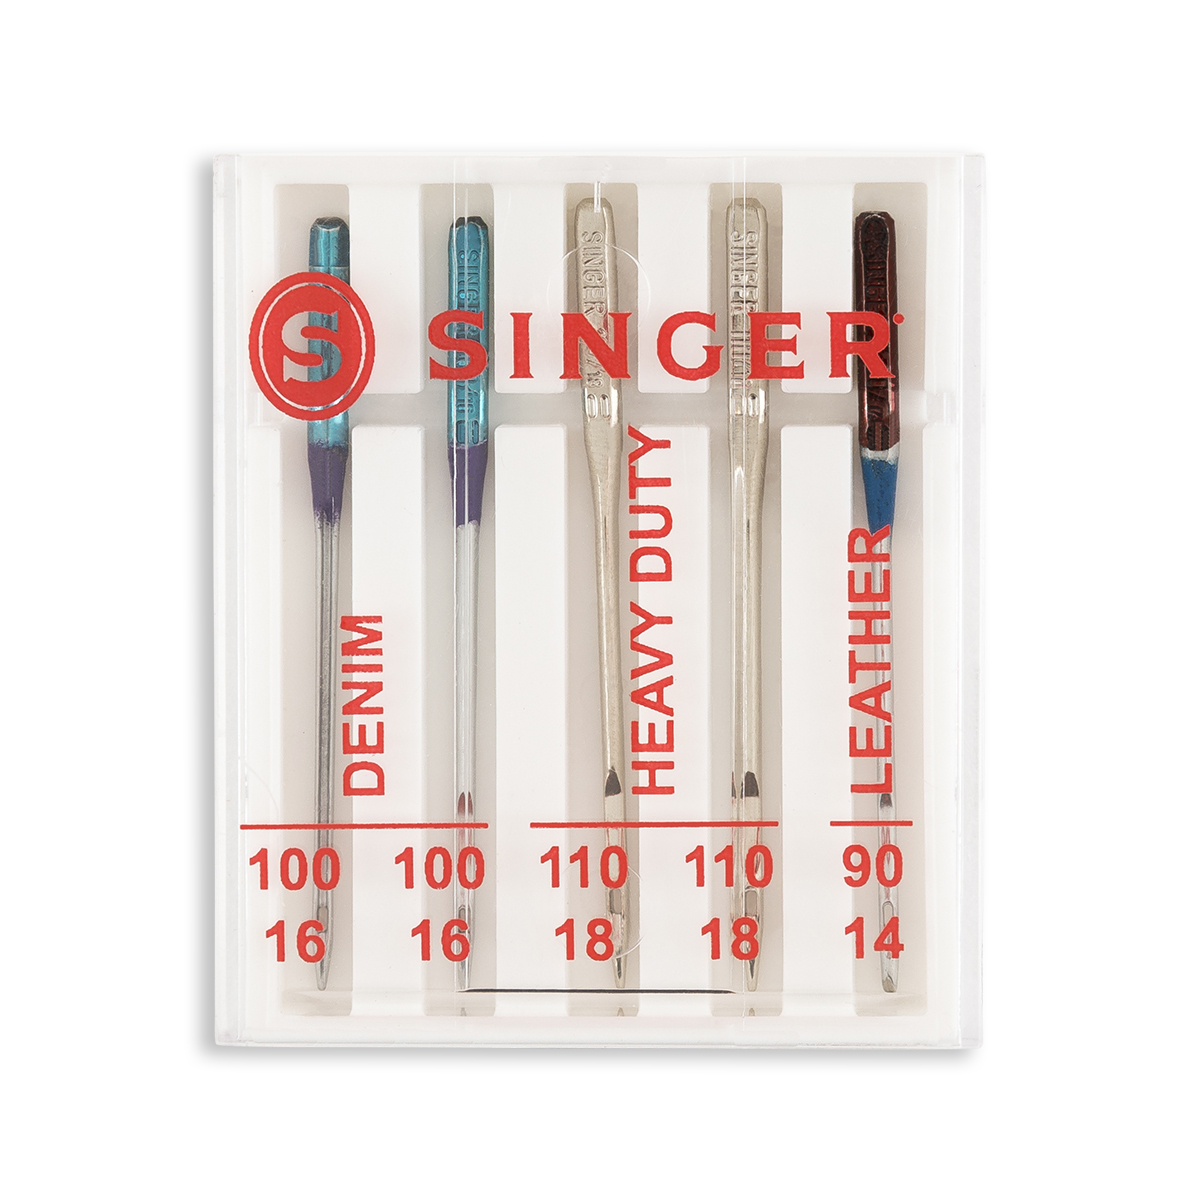 Leather Needles for Sewing Machine Combo Pack, Sizes (100/16 and 110/18)